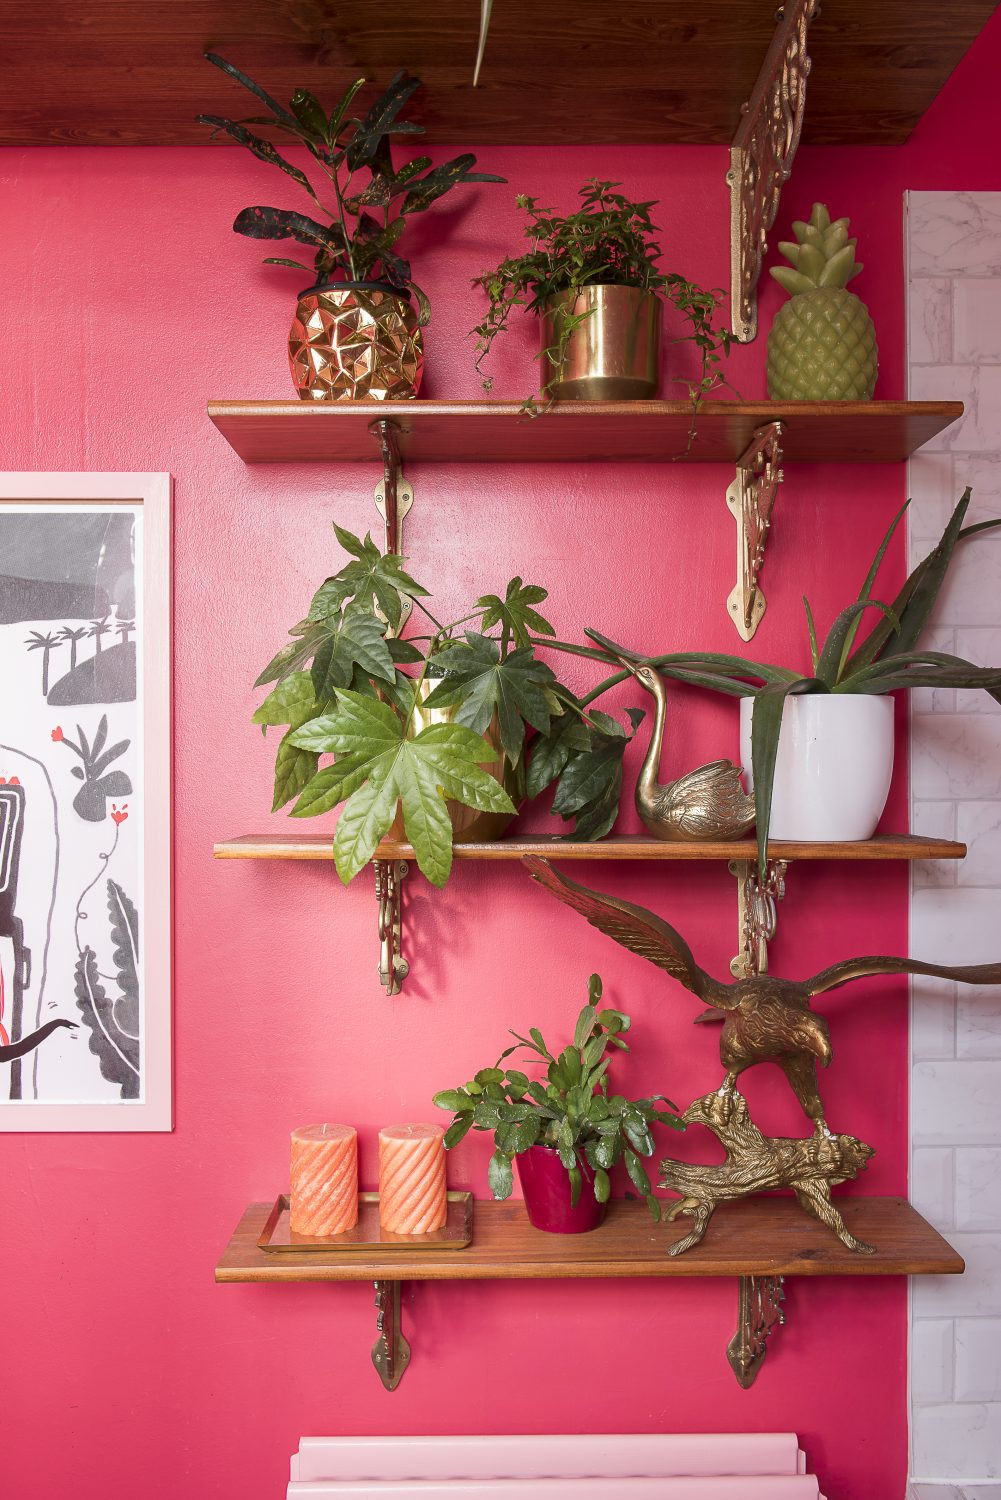 Amy has used ferns and evergreens to bring a slightly Victorian parlour overlay to the look of the bathroom, despite its bright pink walls